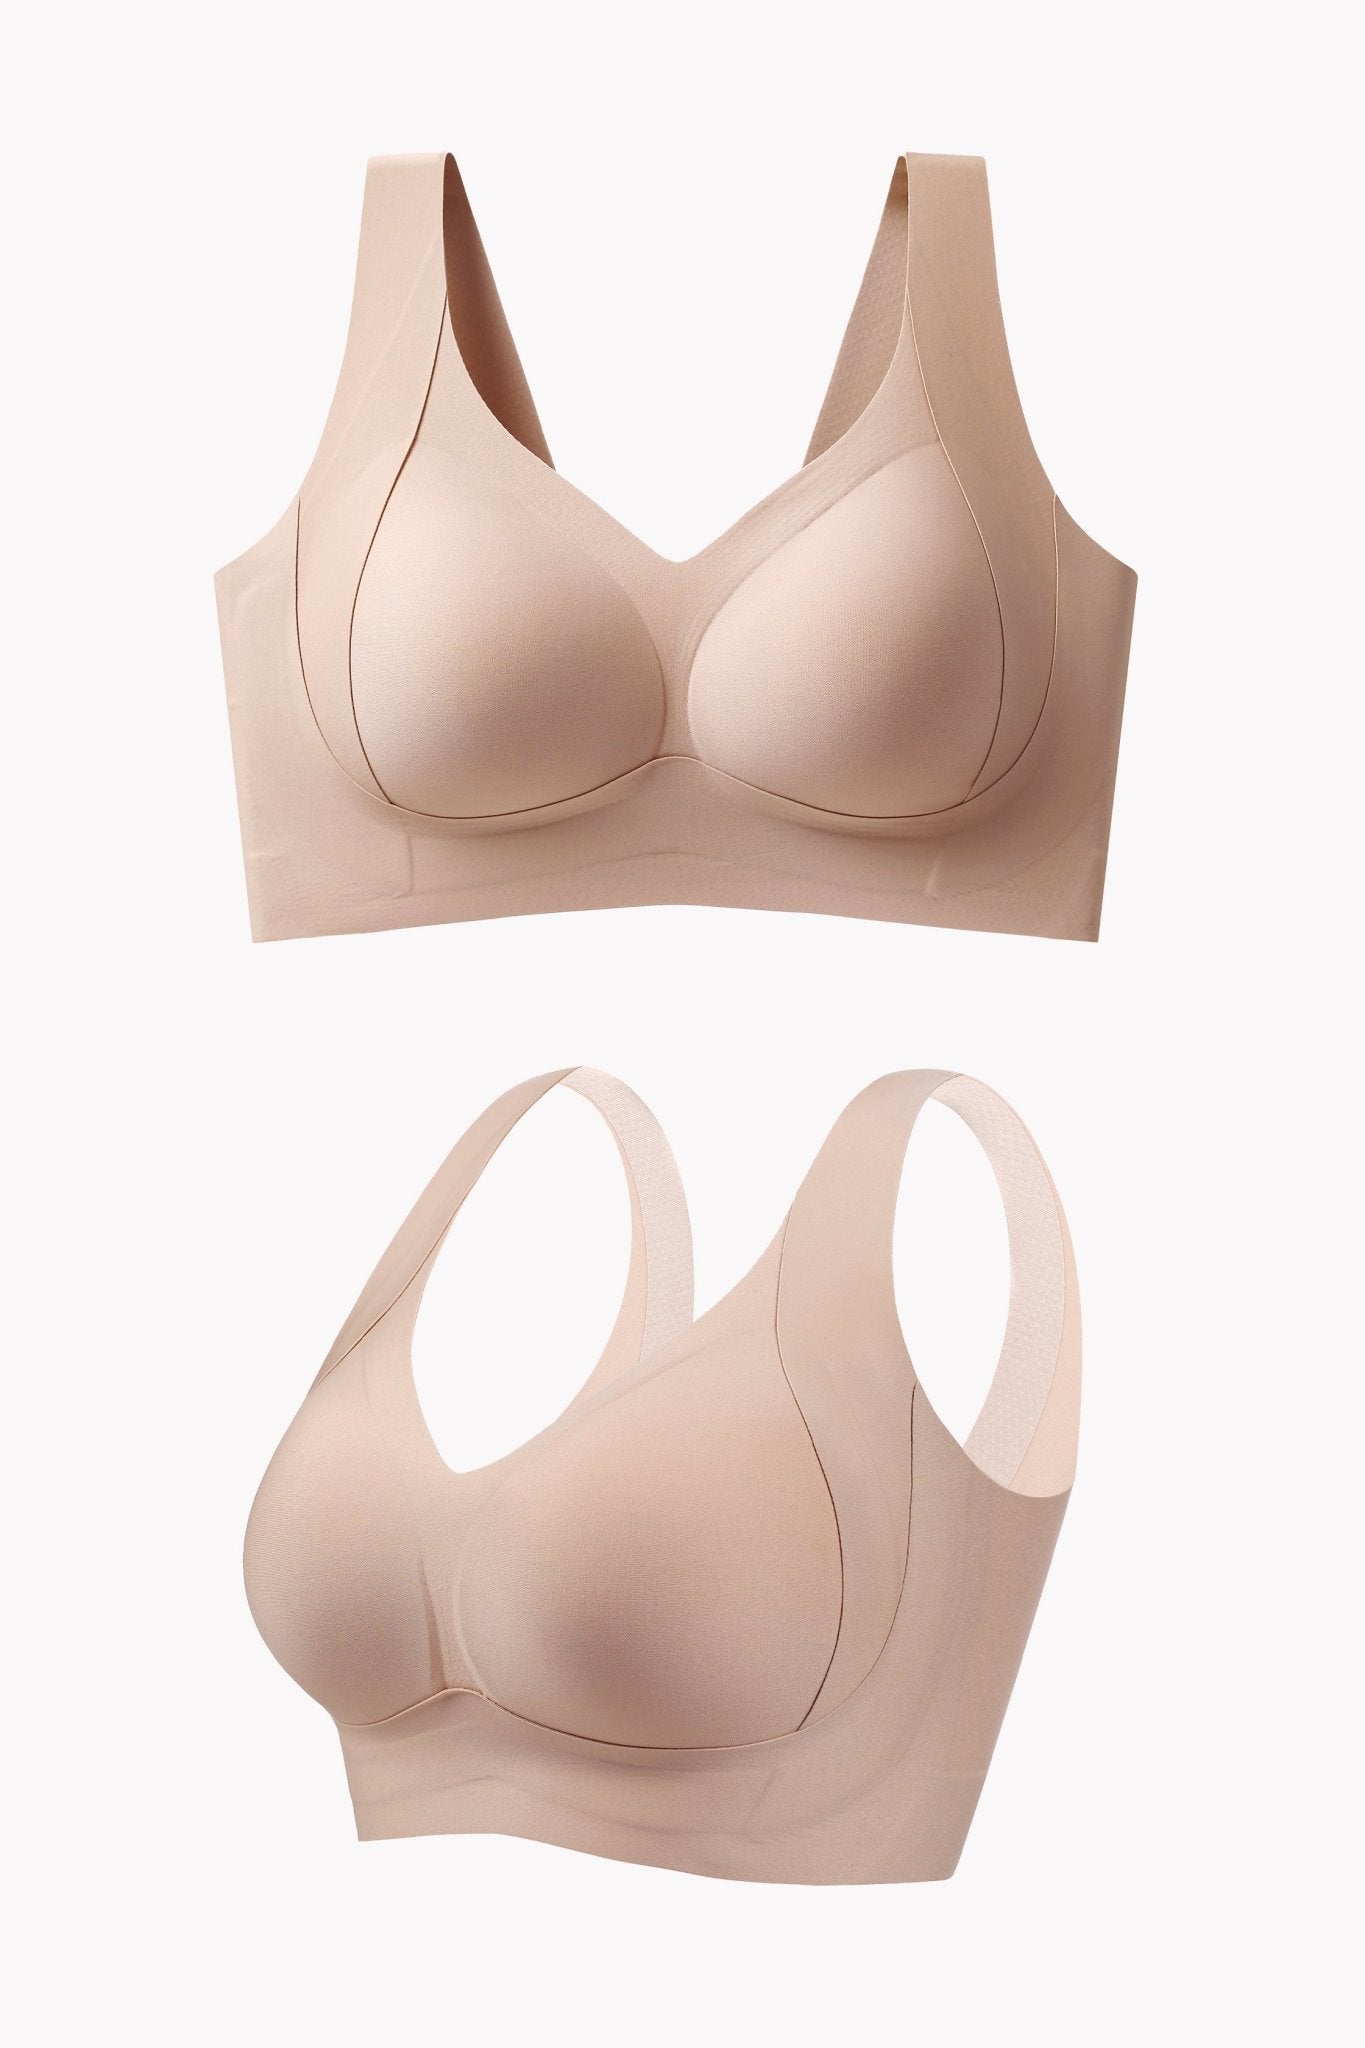 Easy Comforts Style™ Mesh Cooling Comfort Bra